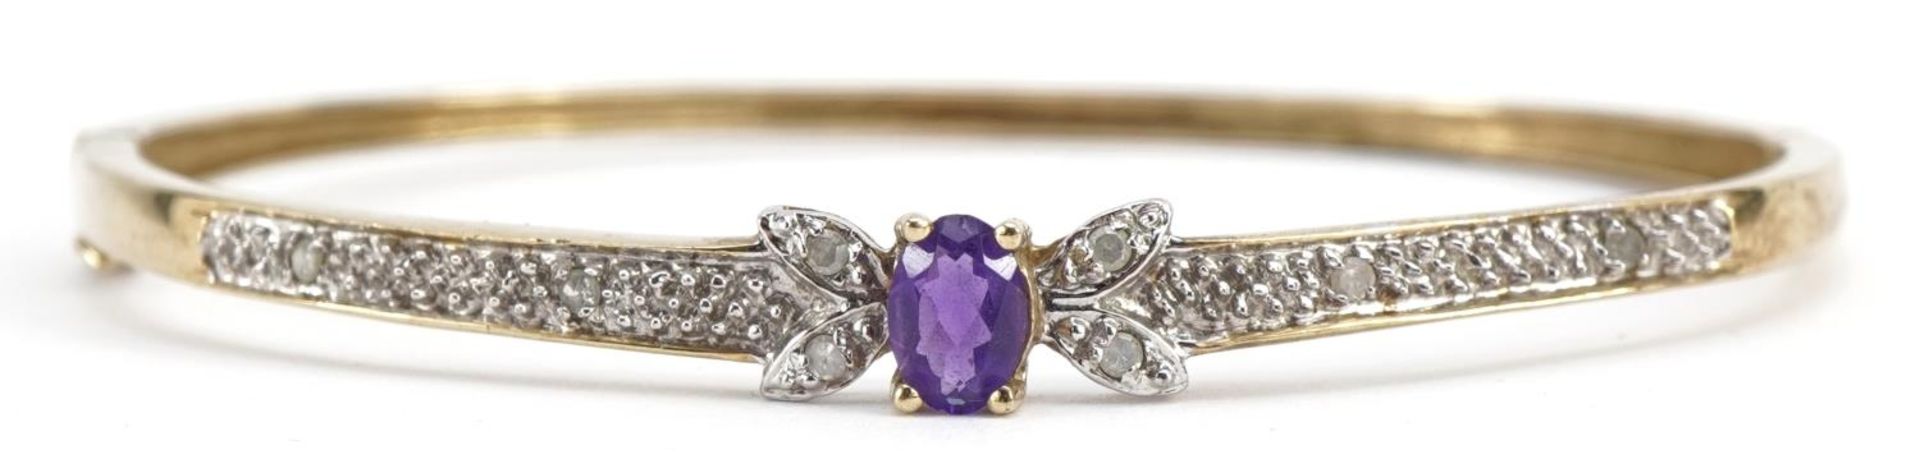 9ct gold diamond and amethyst hinged bangle, the bracelet stamped 0.10 carat, 6.3cm wide, 7.4g : For